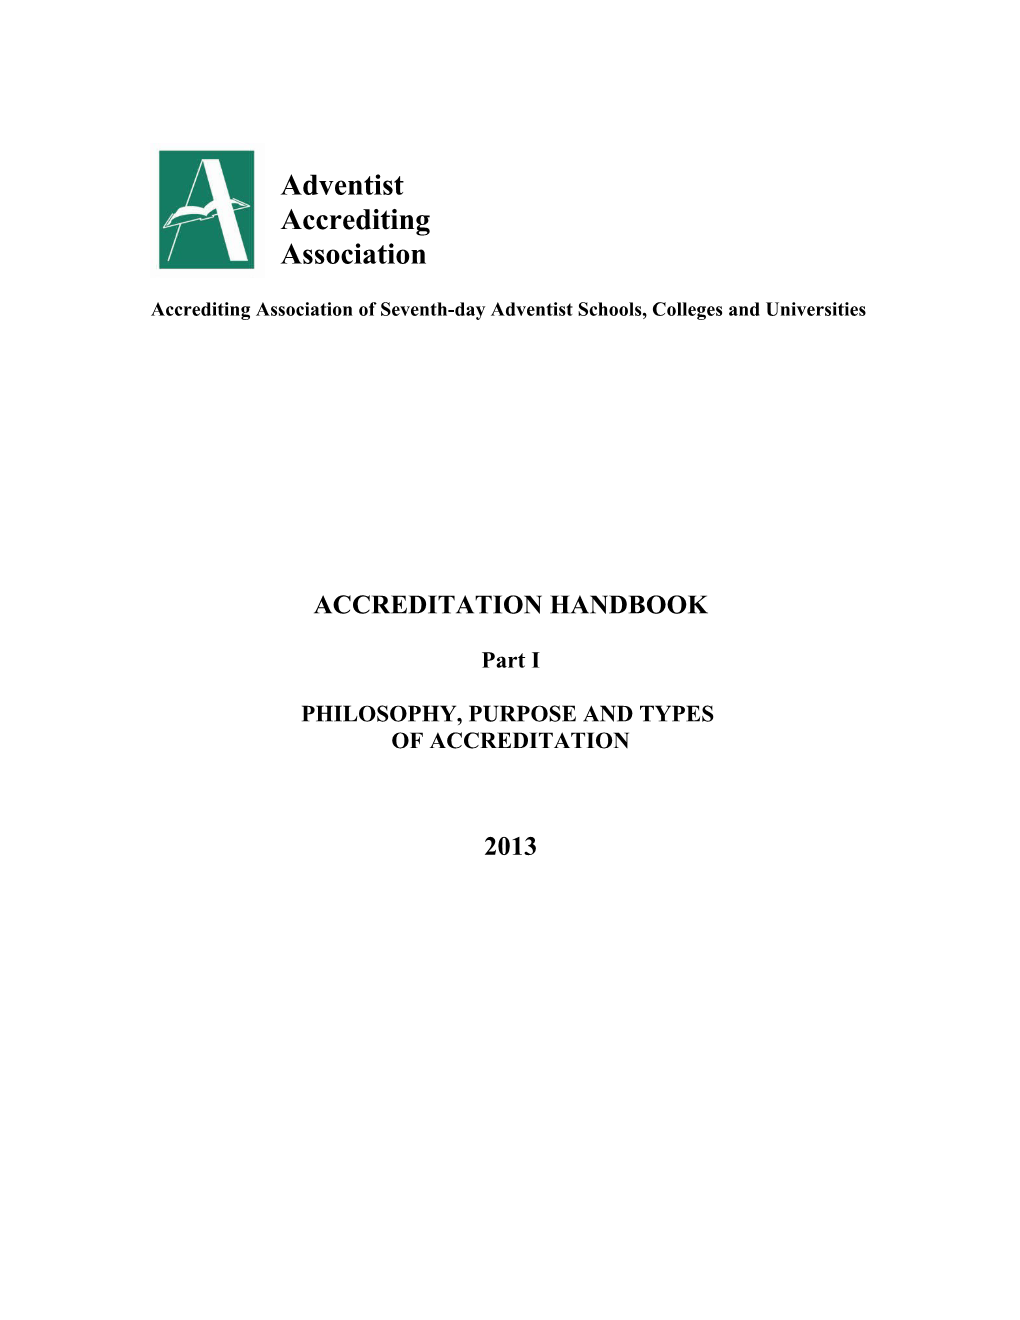 Accrediting Association Of Seventh-Day Adventist